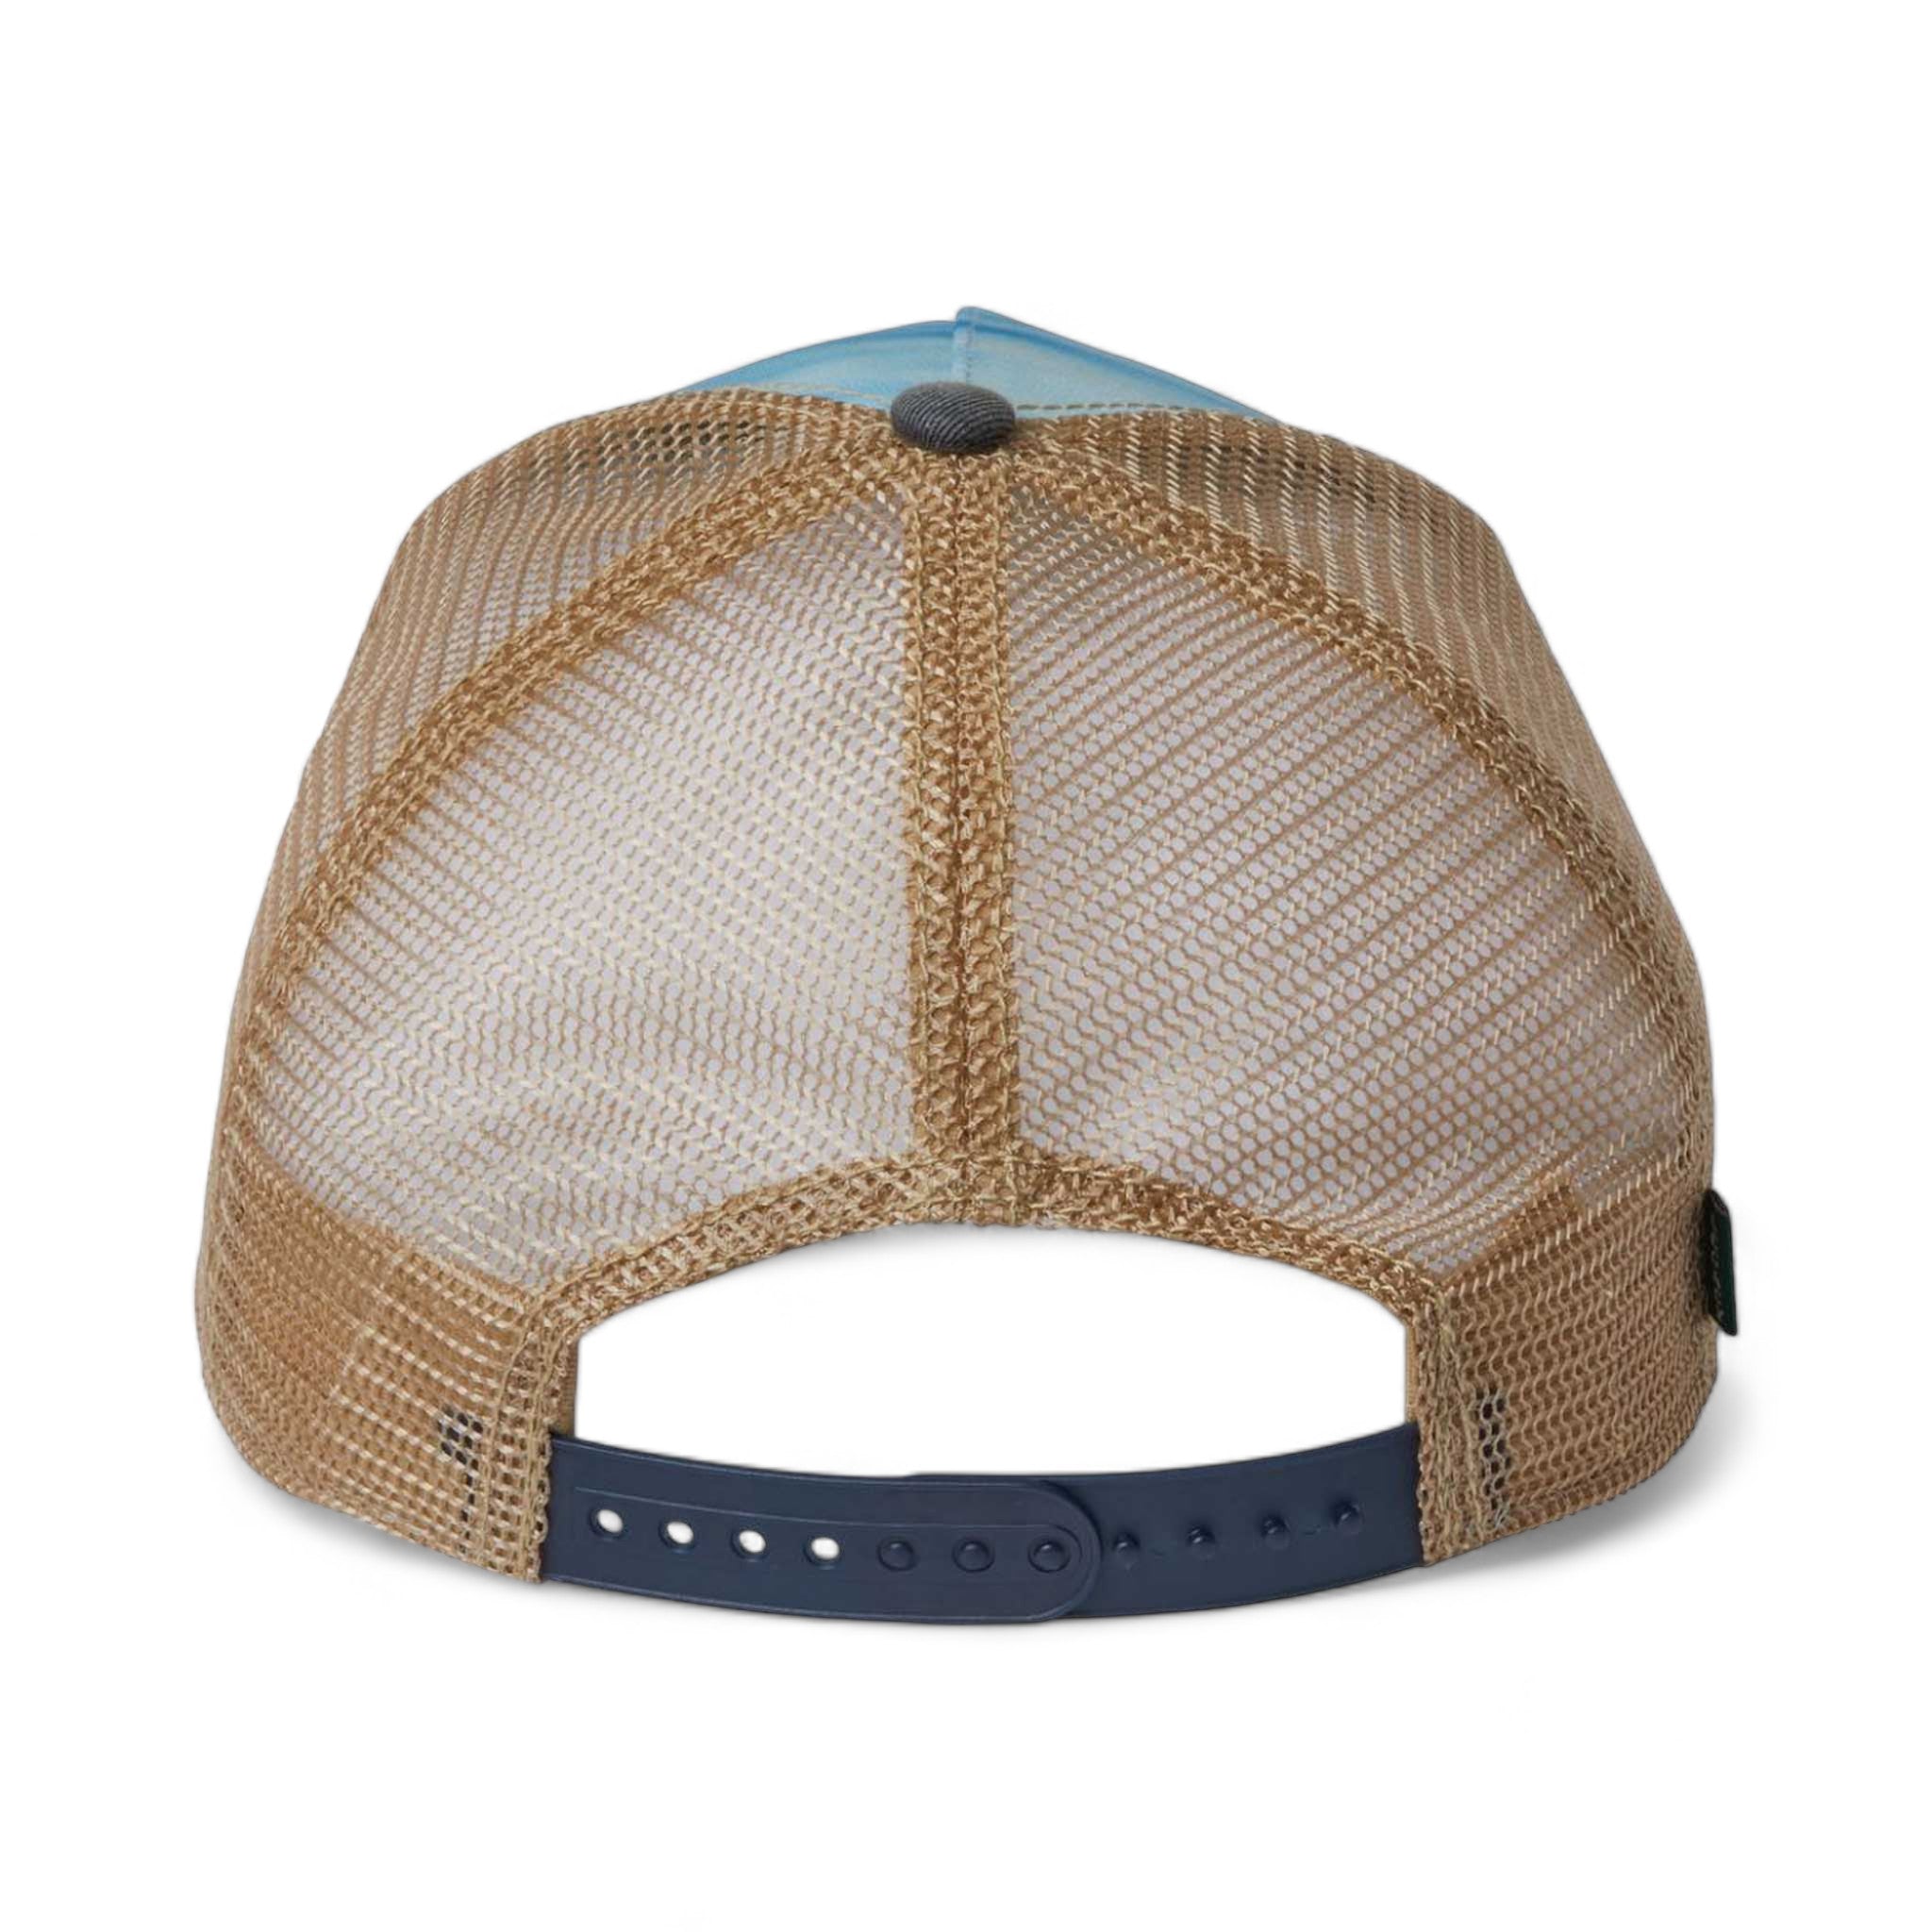 Back view of LEGACY OFAFP custom hat in calm waters, navy and khaki